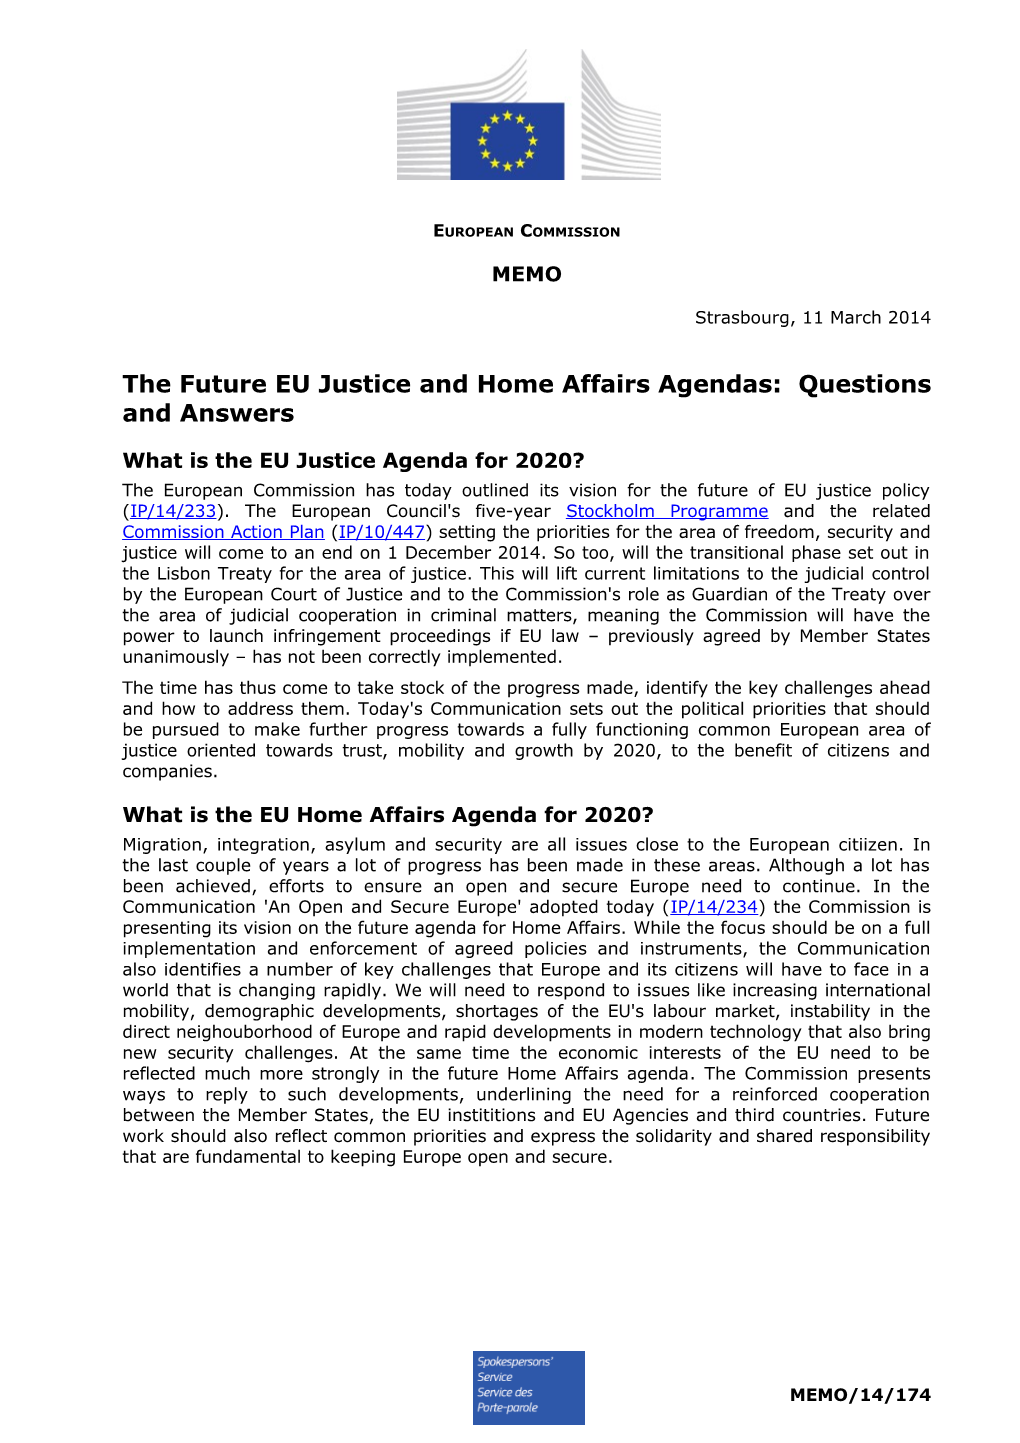 The Future EU Justice and Home Affairs Agendas:Questions and Answers